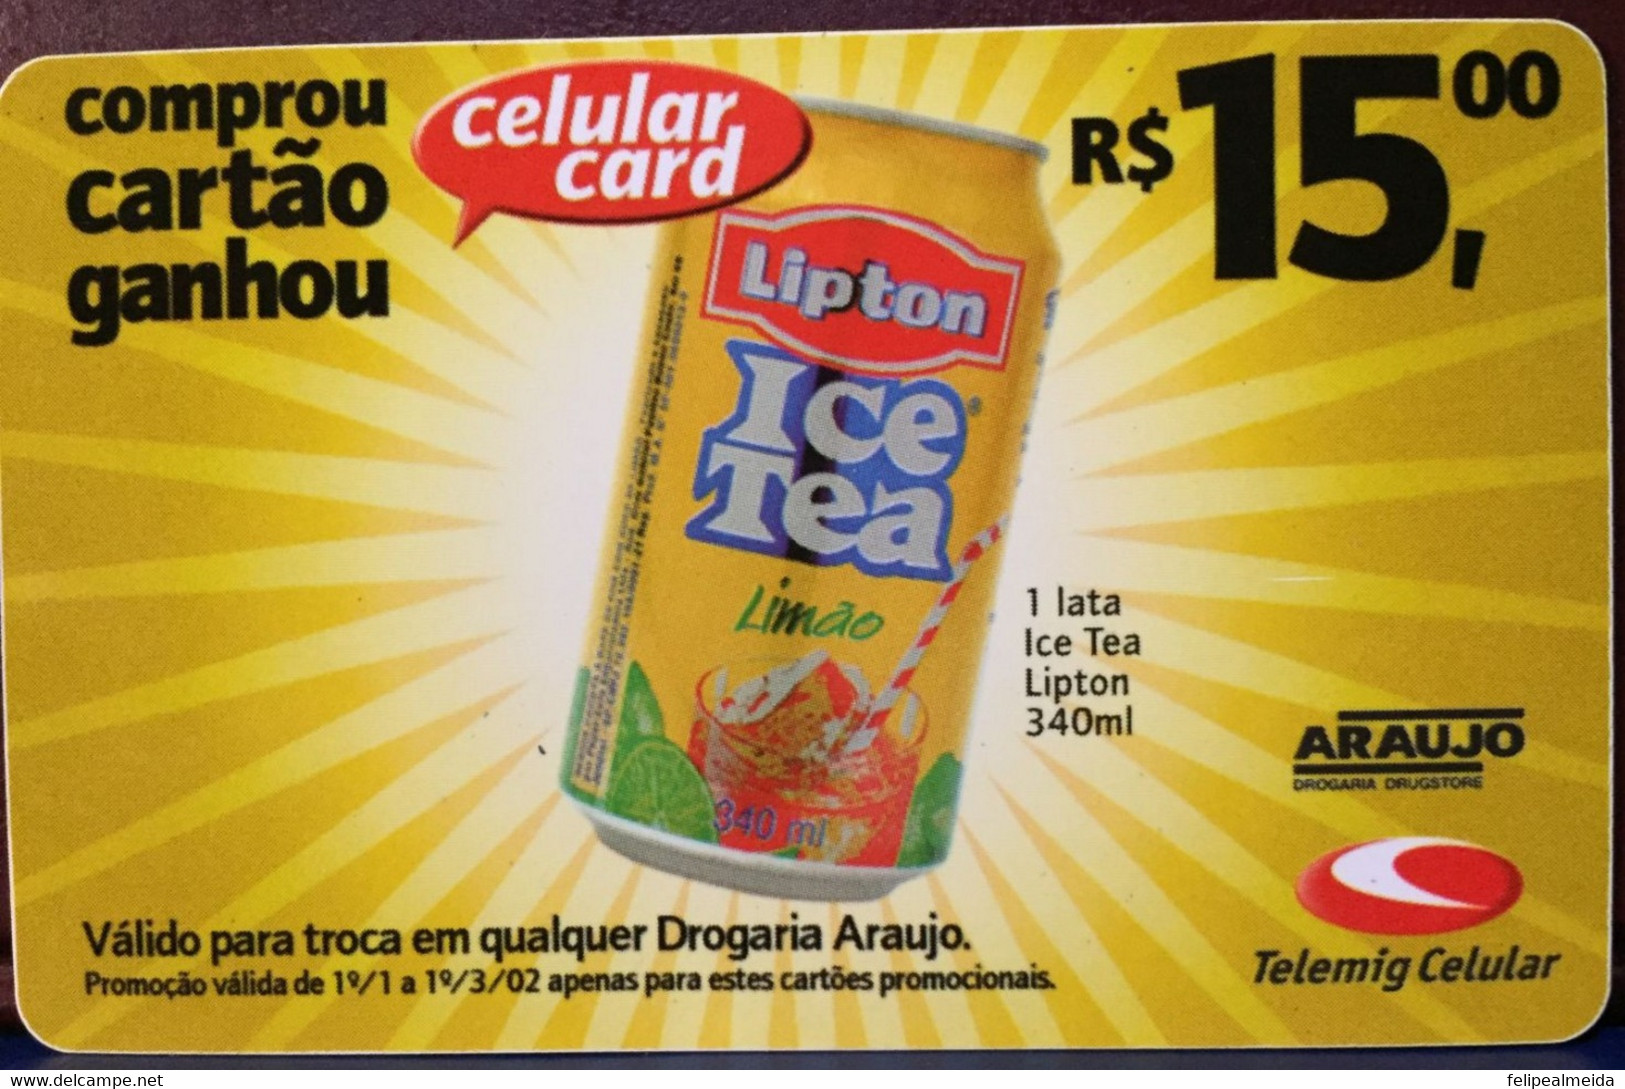 Phone Card Manufactured By Telemig Celular 2004 - 15 Reais De Credito, Promotion That Gave The Right To A Can Of Juice - Opérateurs Télécom